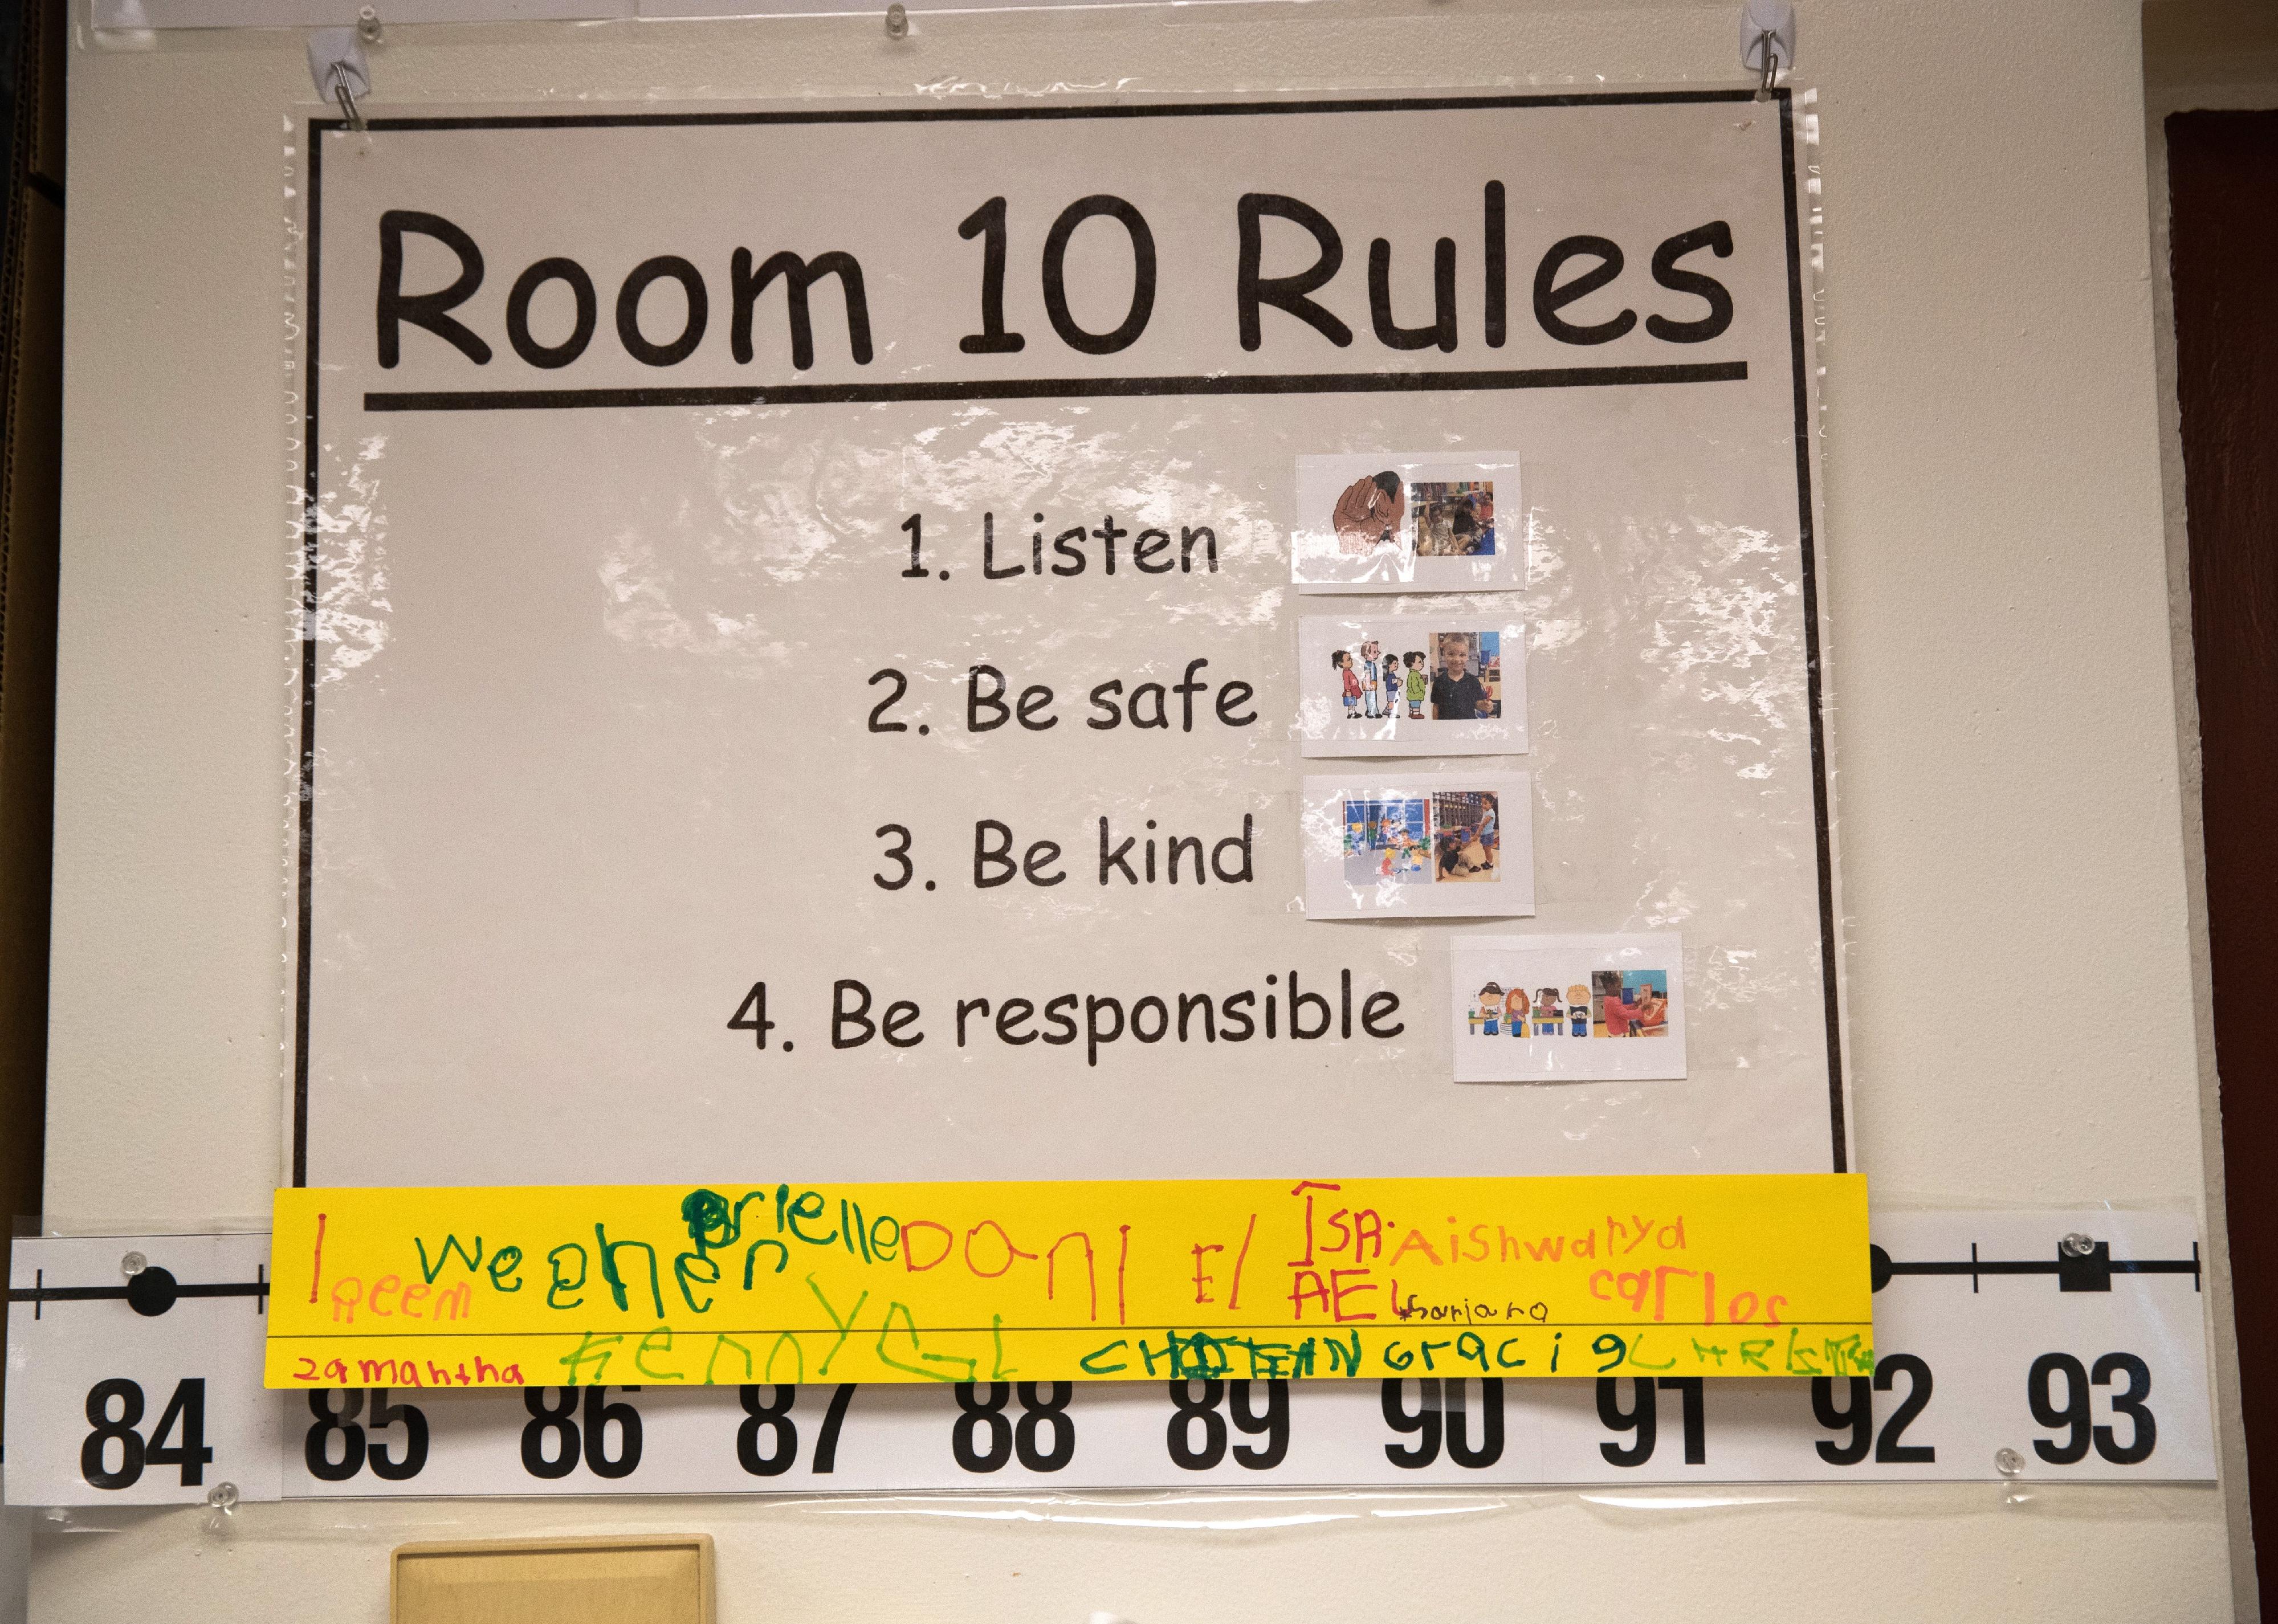 A sign in a class listing rules like Be Kind, Be Safe, Listena and Be Responsible.